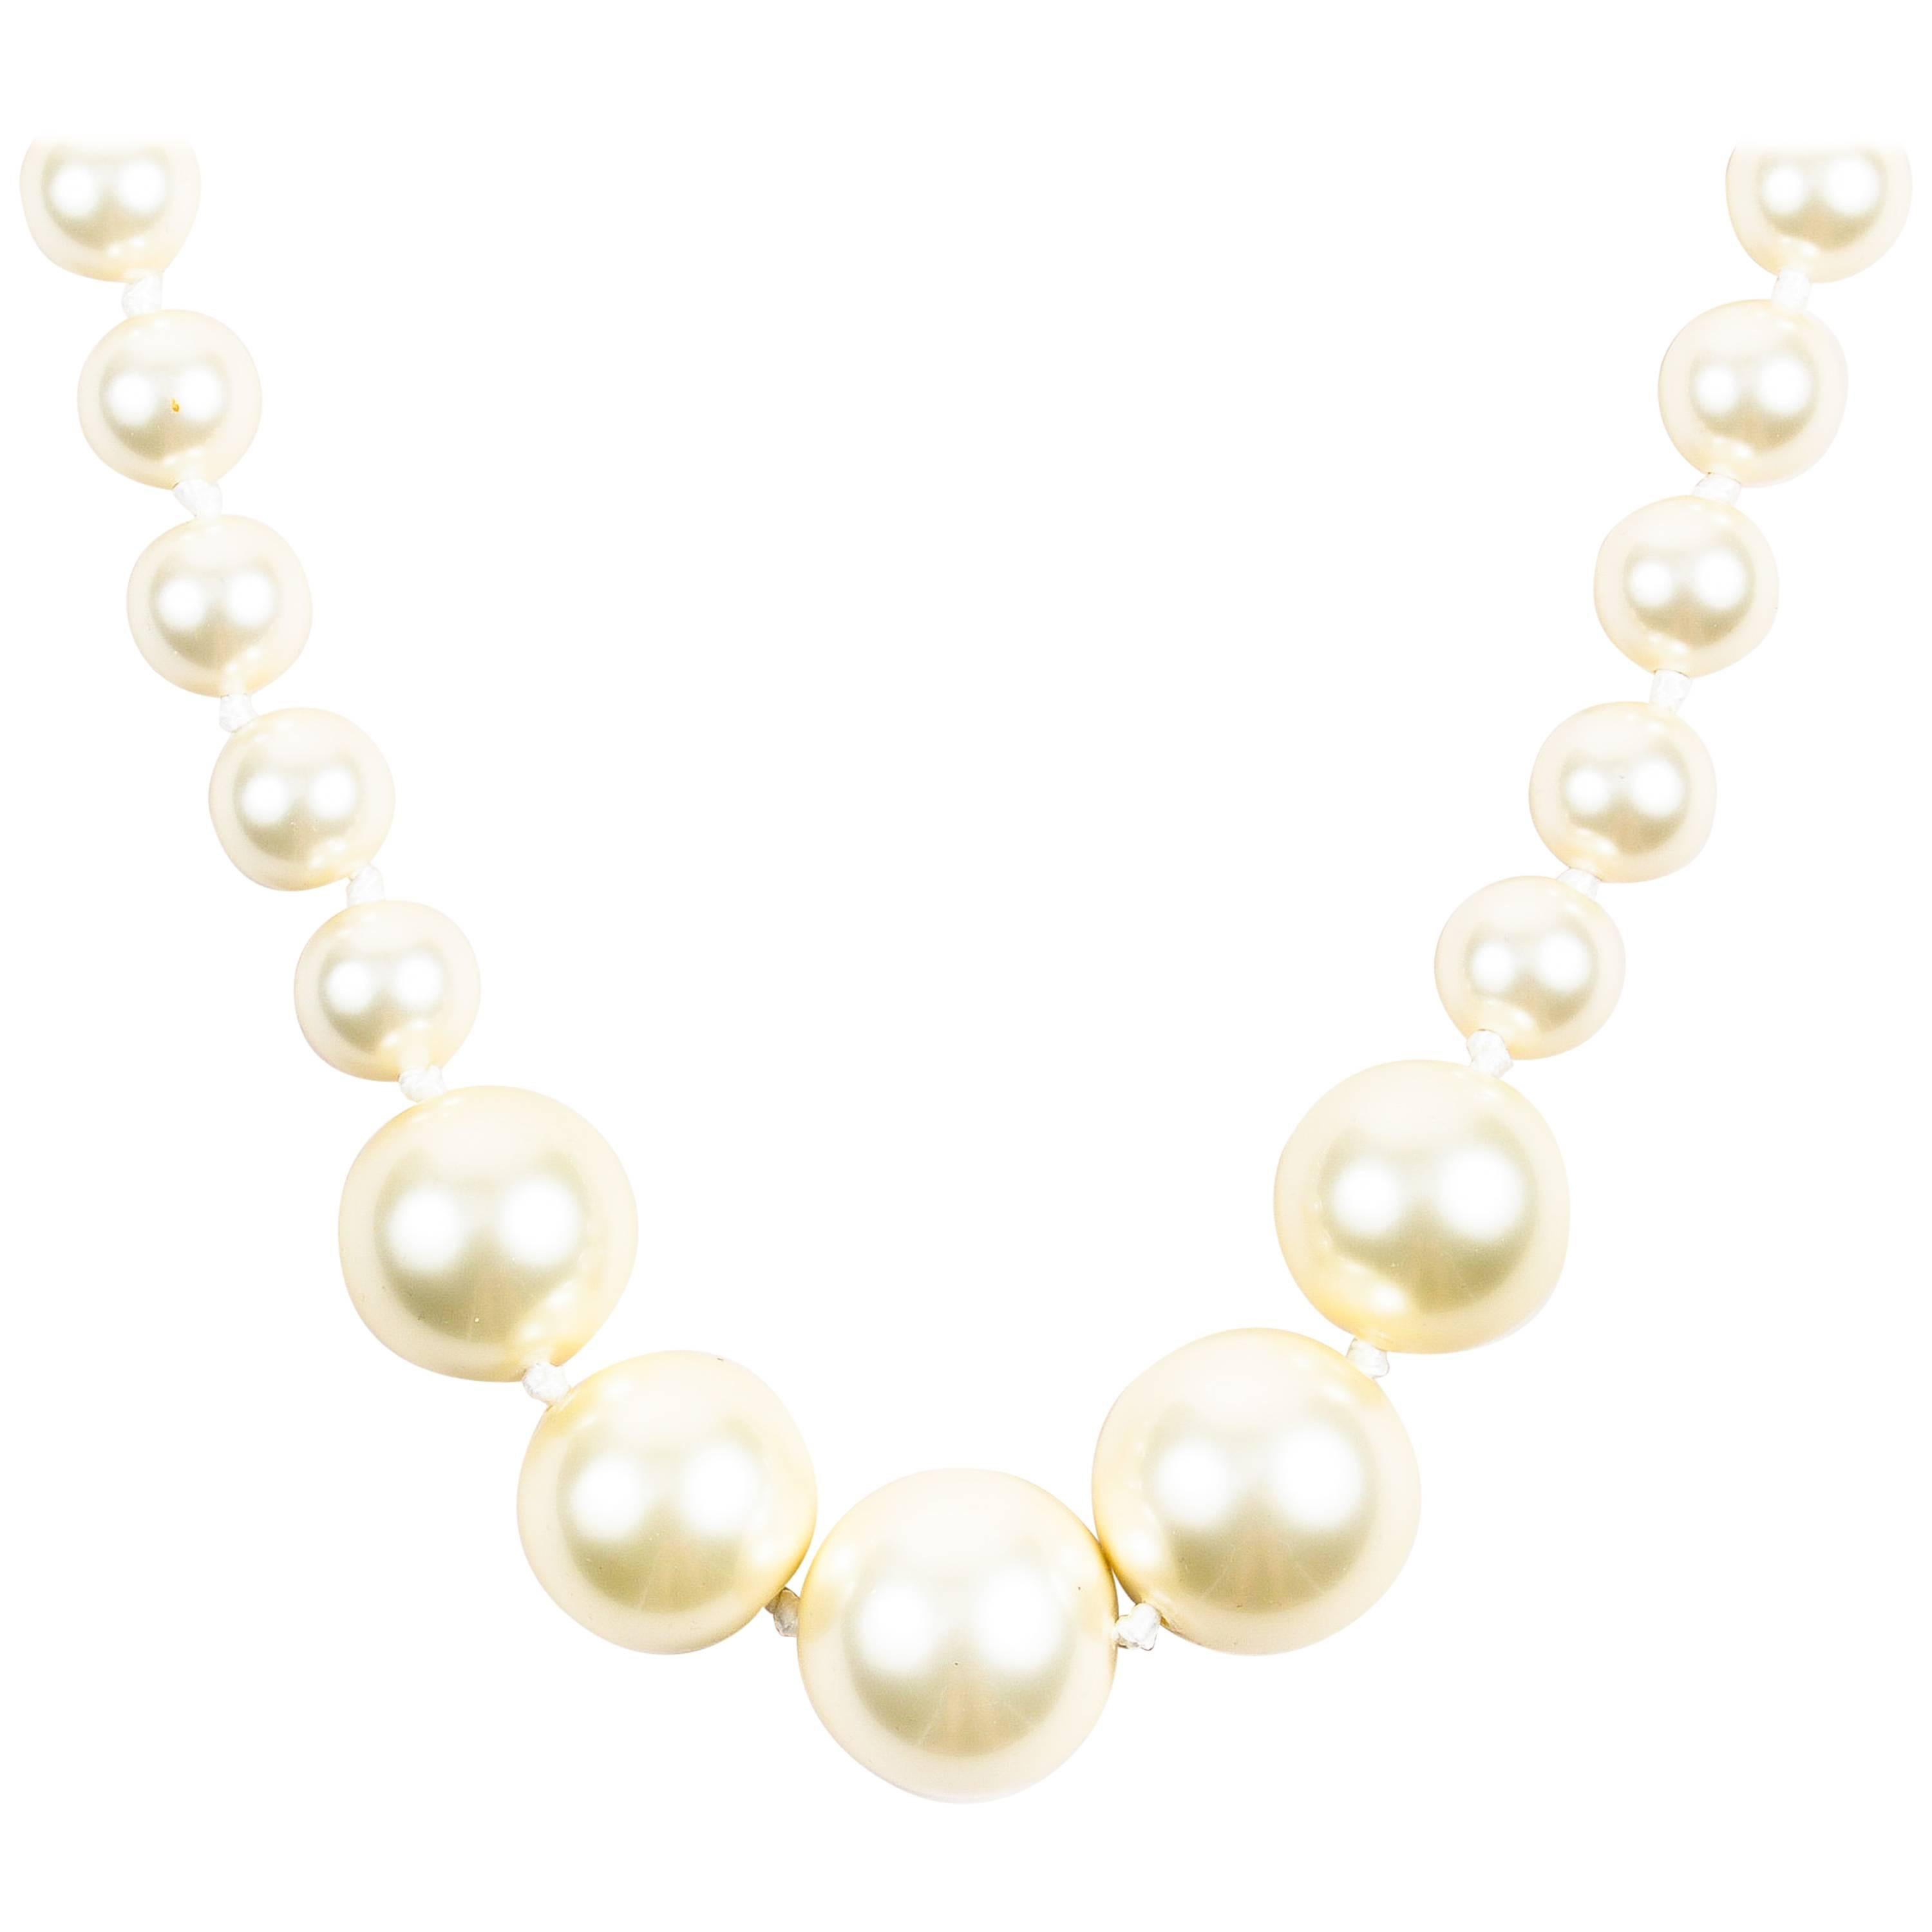 Louis Vuitton Fall 06 Runway Cream Faux Pearl Oversized Satin Ribbon Necklace For Sale